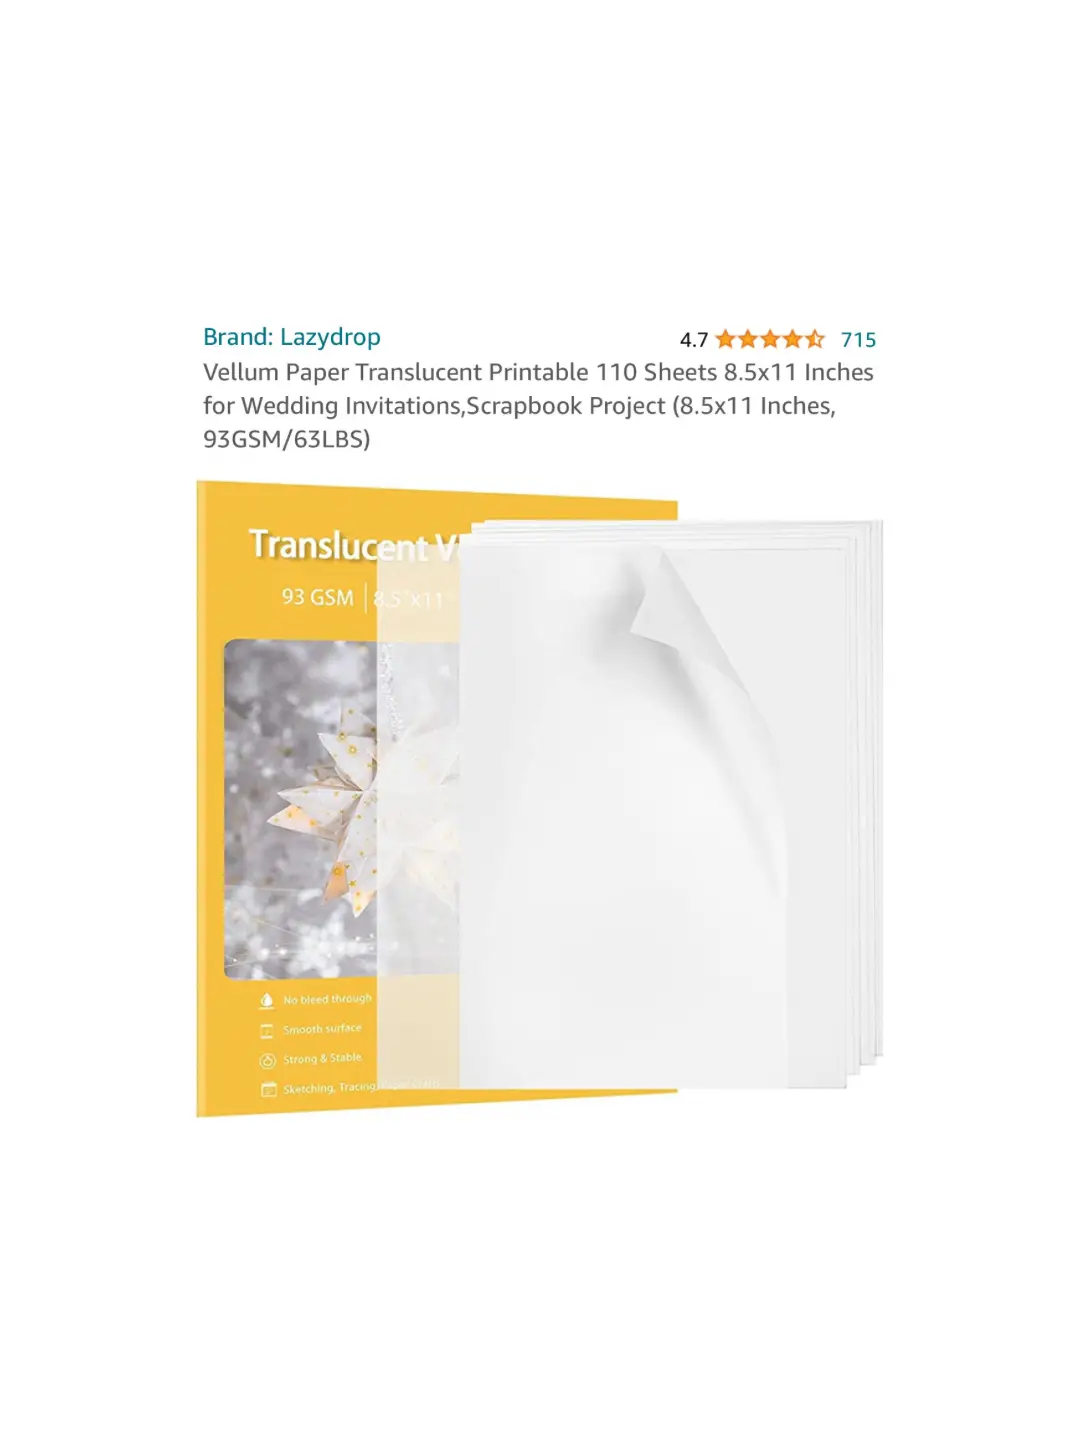 Lazydrop Vellum Paper Translucent Printable 110 Sheets 8.5x11 Inches for Wedding Invitations,Scrapbook Project (8.5x11 Inches, 93GSM/63LBS)